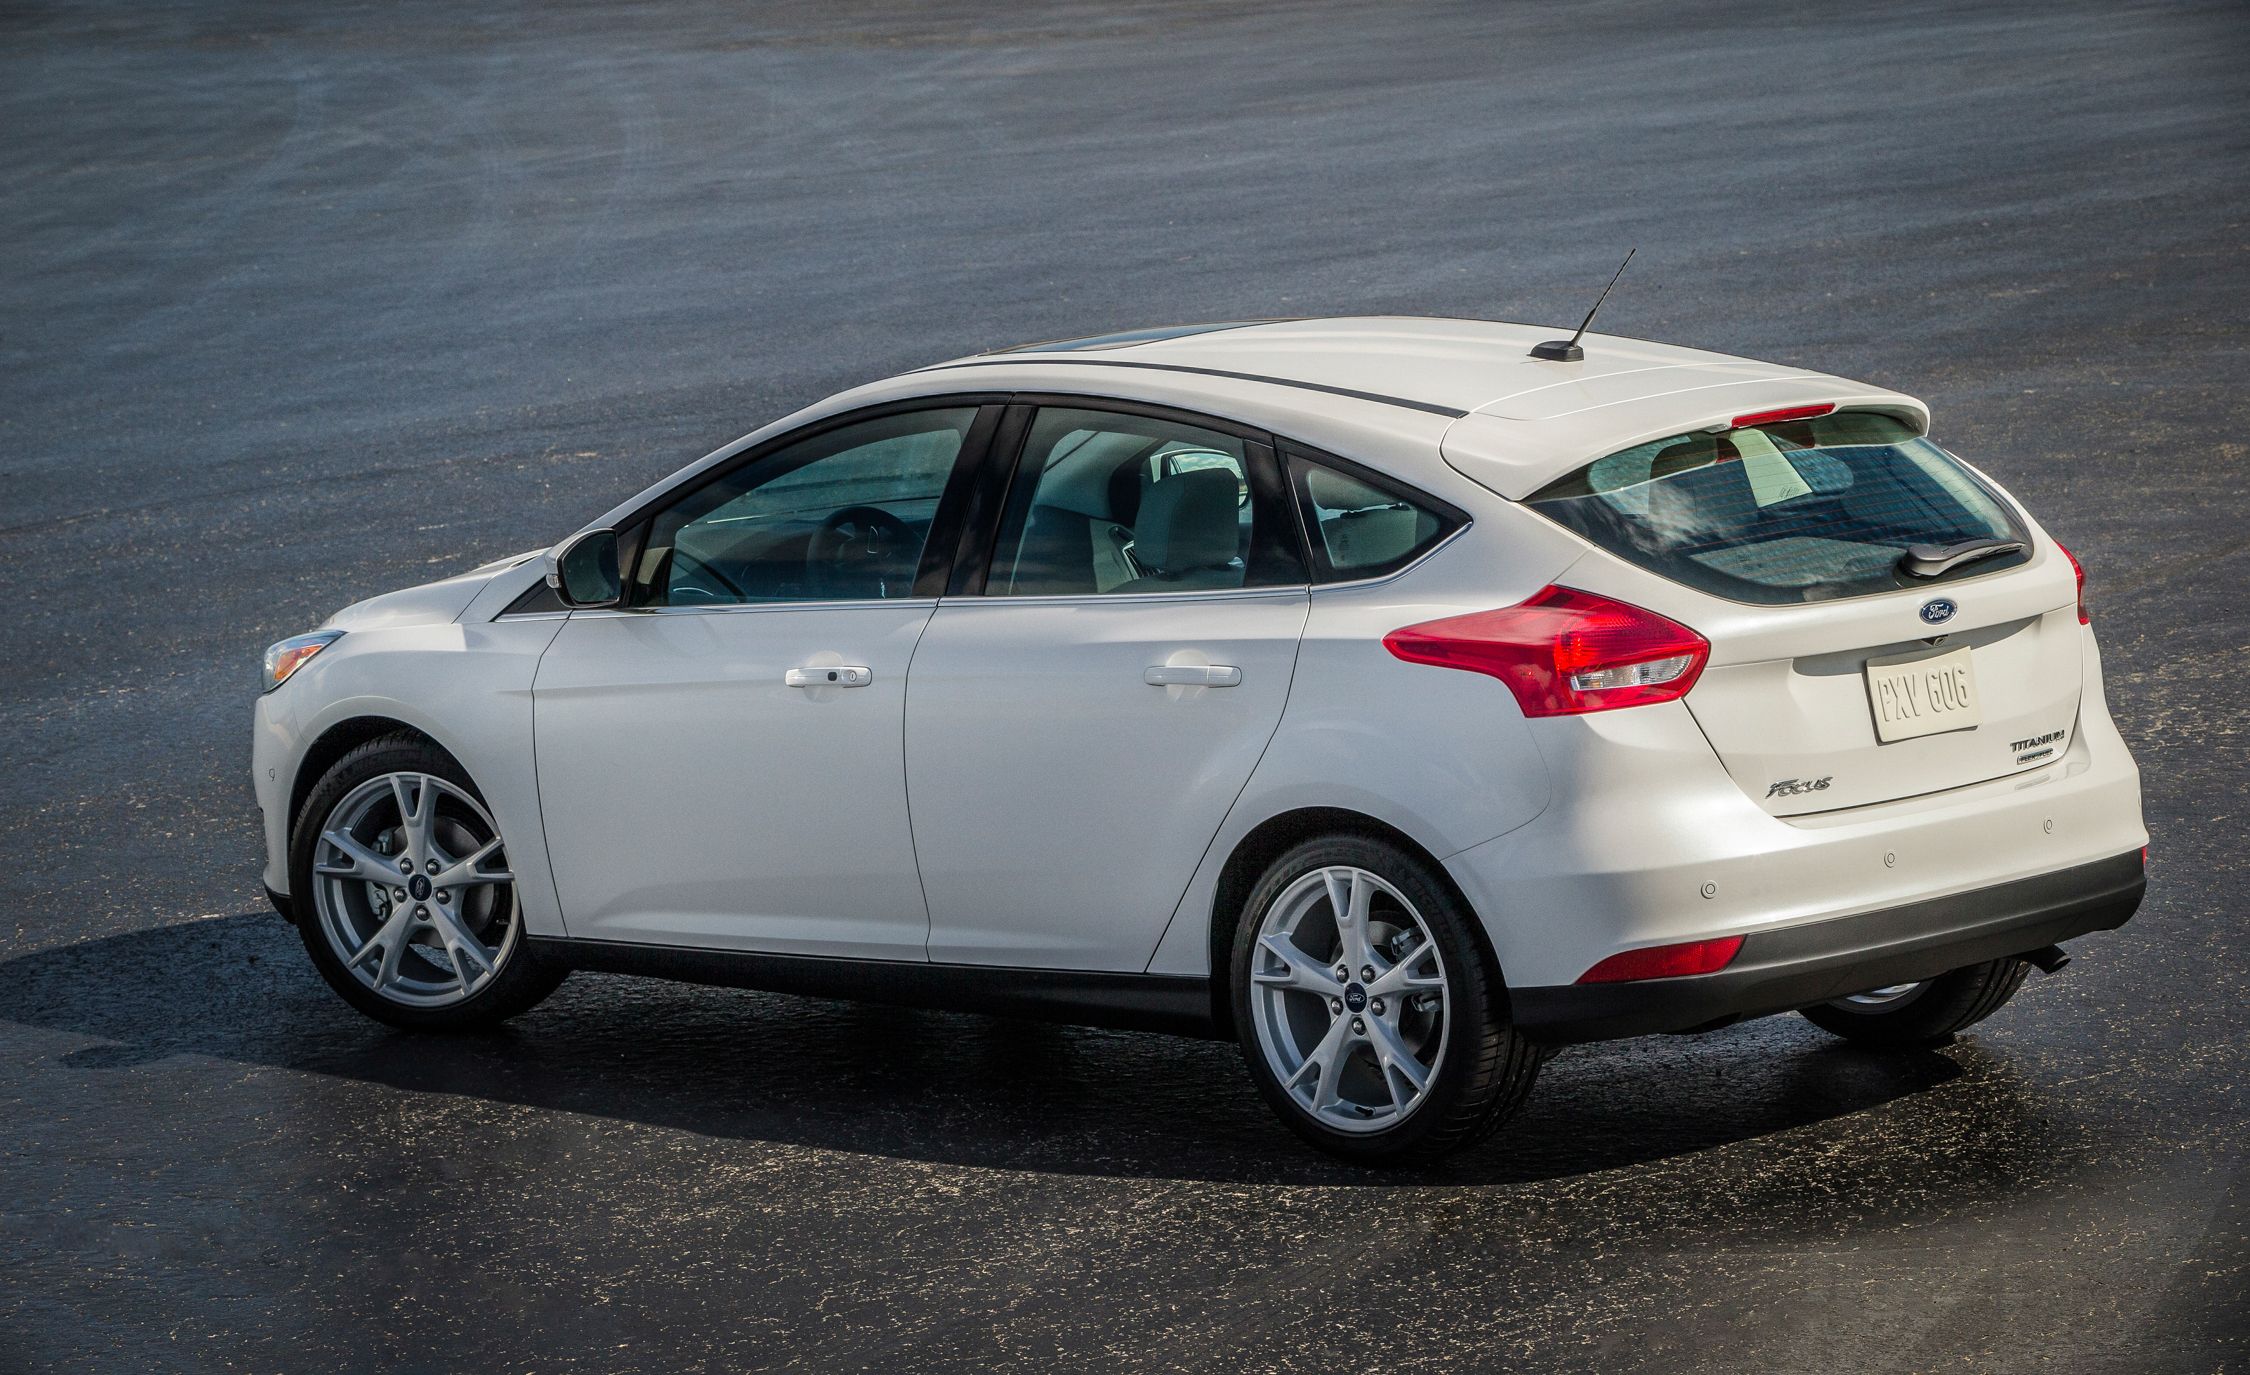 Full Pricing Details for the 2015 Ford Focus – News – Car and Driver